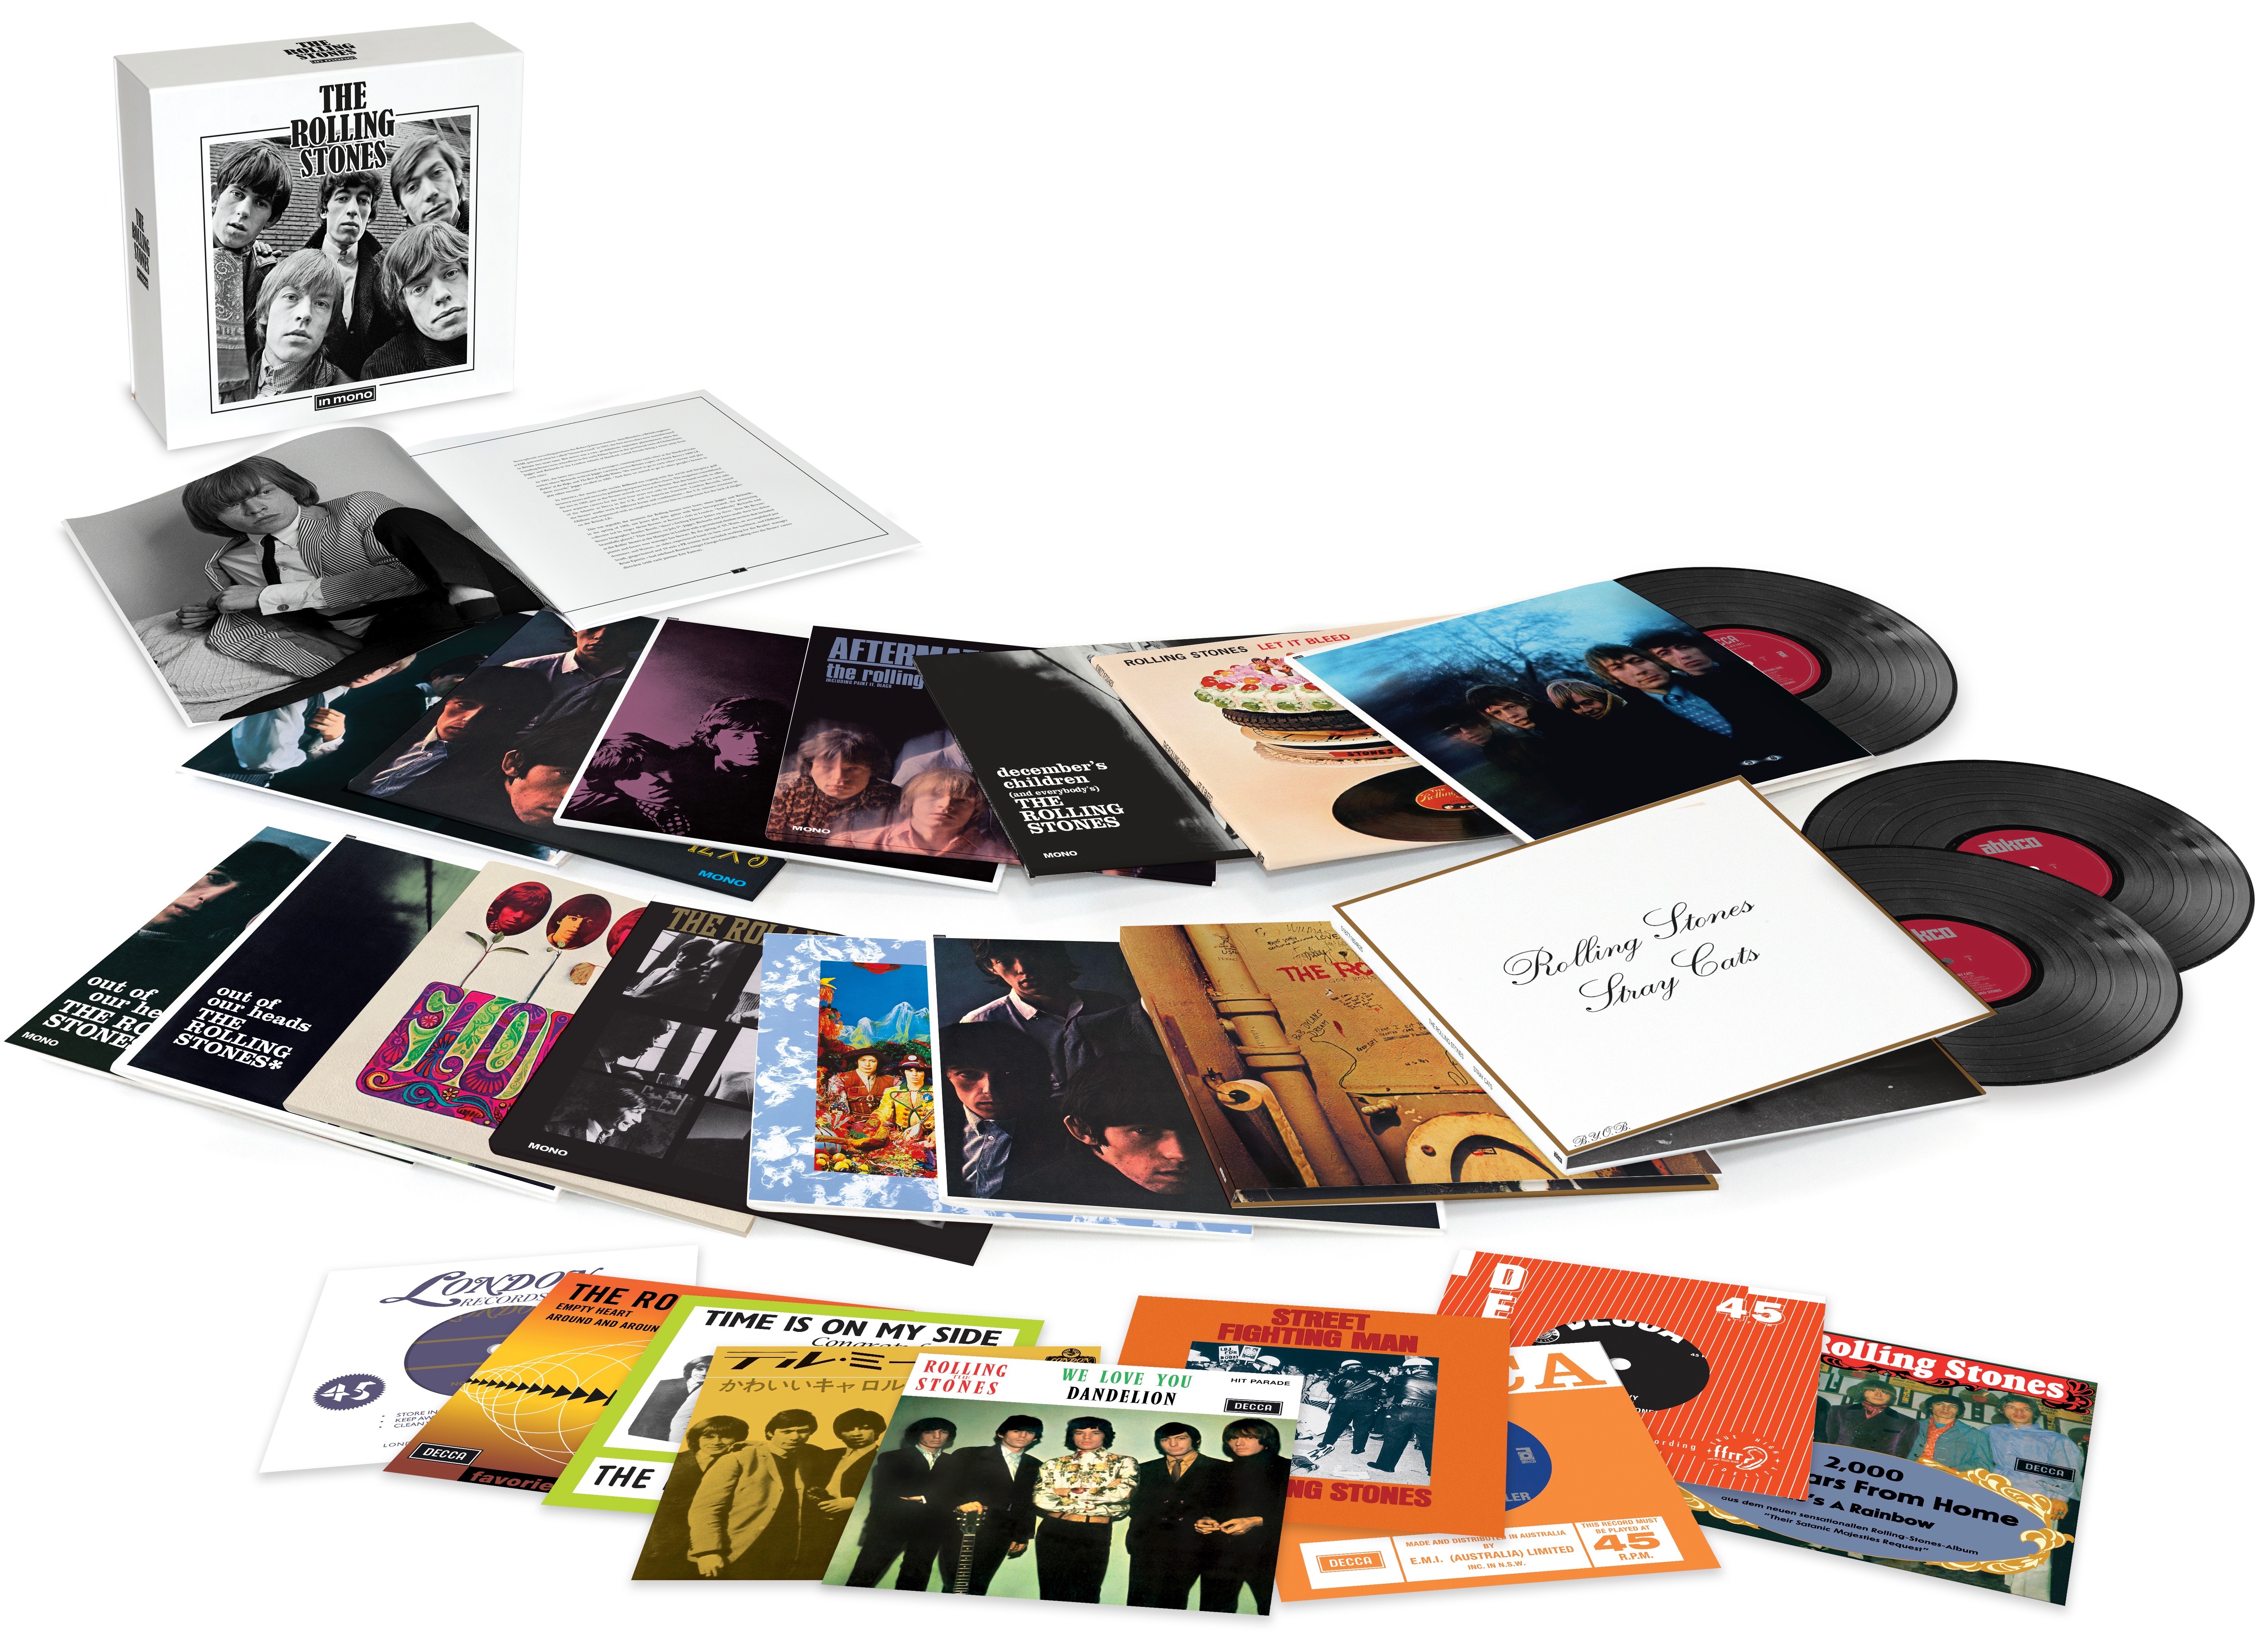 Satisfied now? Here's The Rolling Stones in Mono vinyl box with the 7" singles on ABKCO